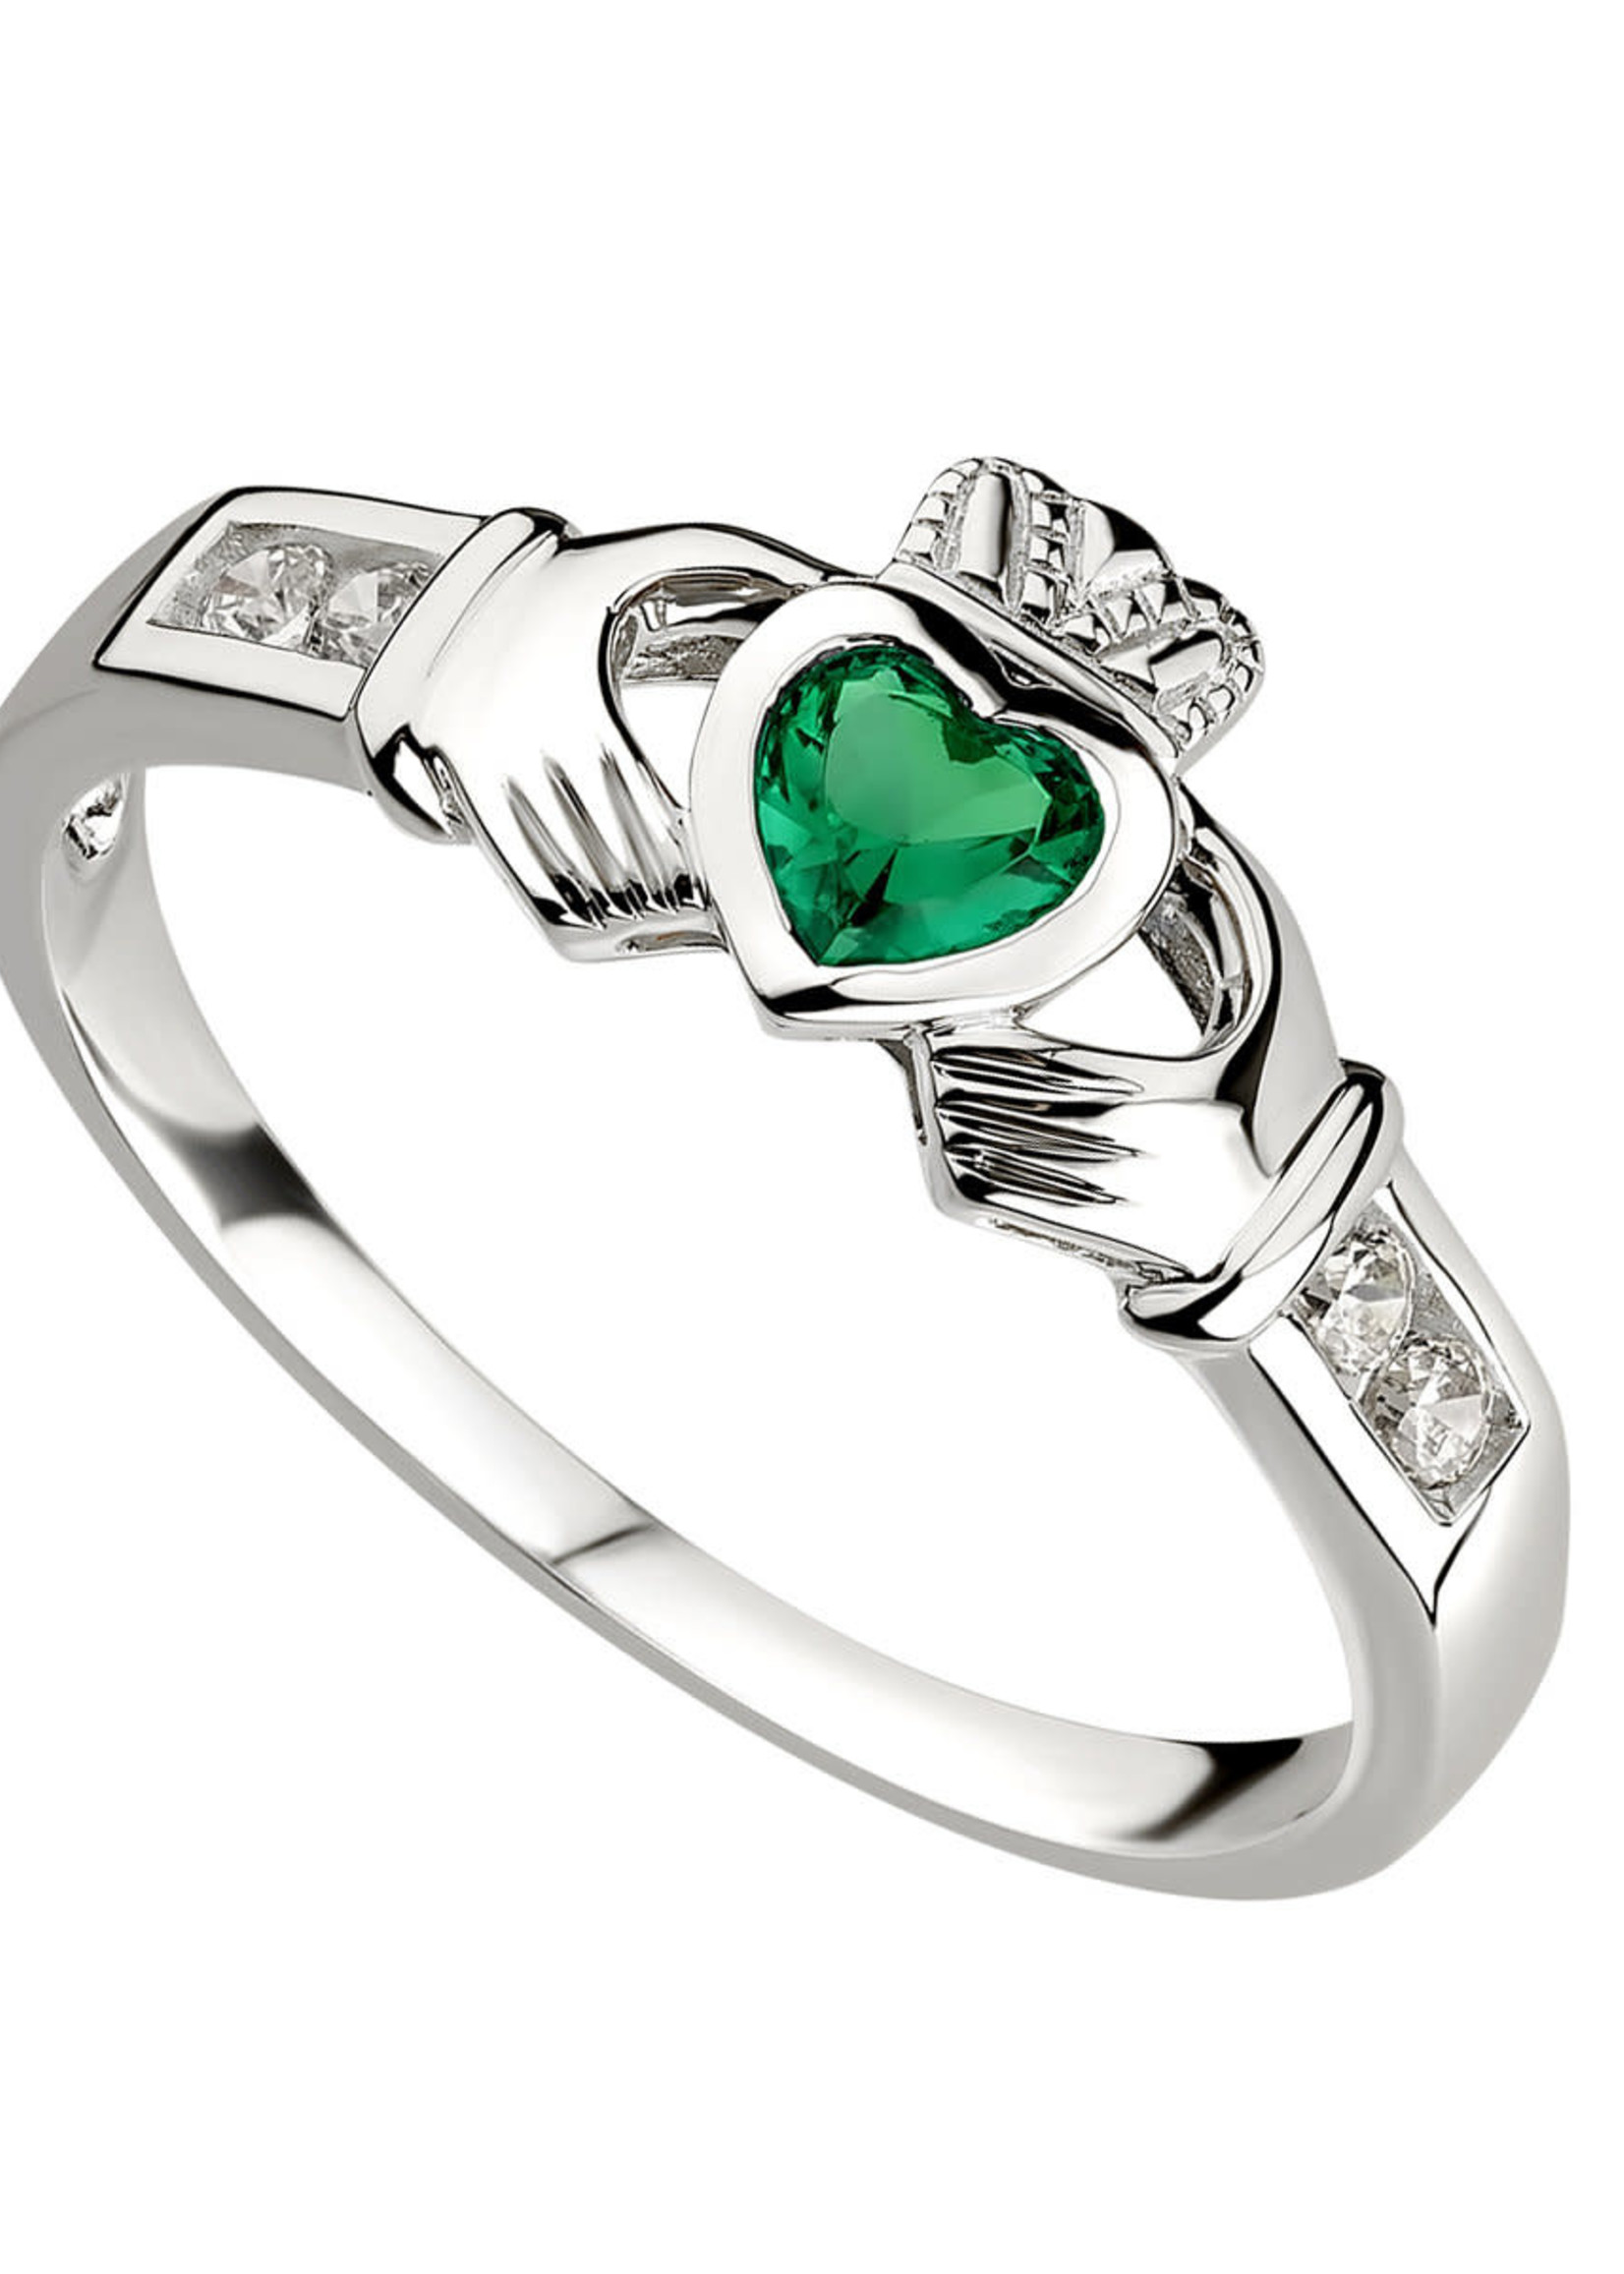 SOLVAR LIMITED Sterling Silver Synthetic Emerald/CZ Claddagh Ring Sz10